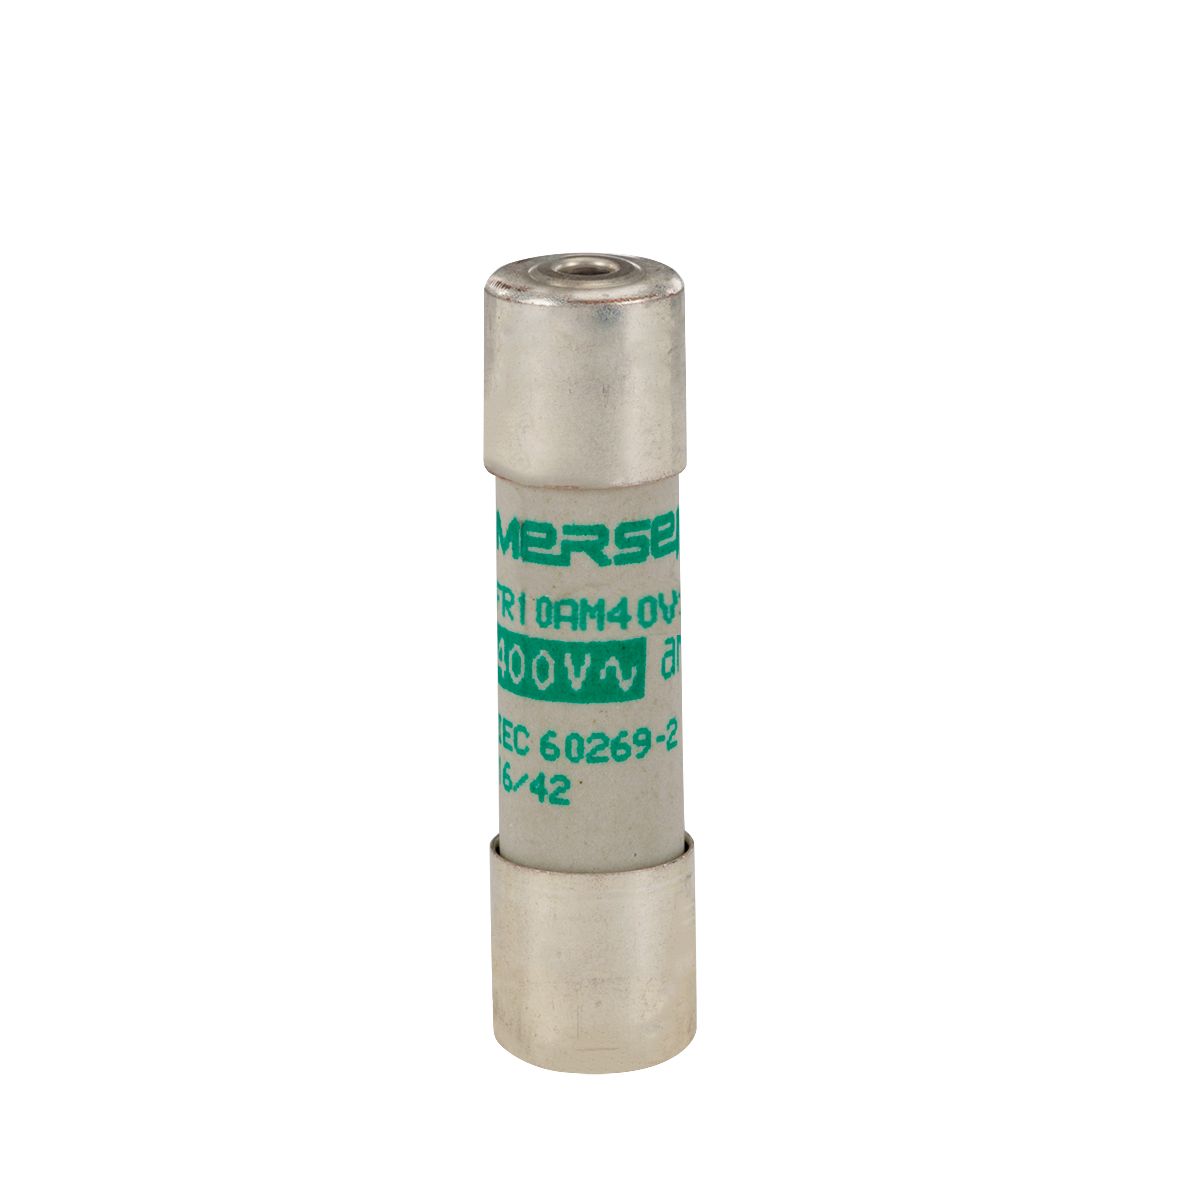 V085256 - Cylindrical fuse-link aM 400VAC 10.3x38, 20A with striker